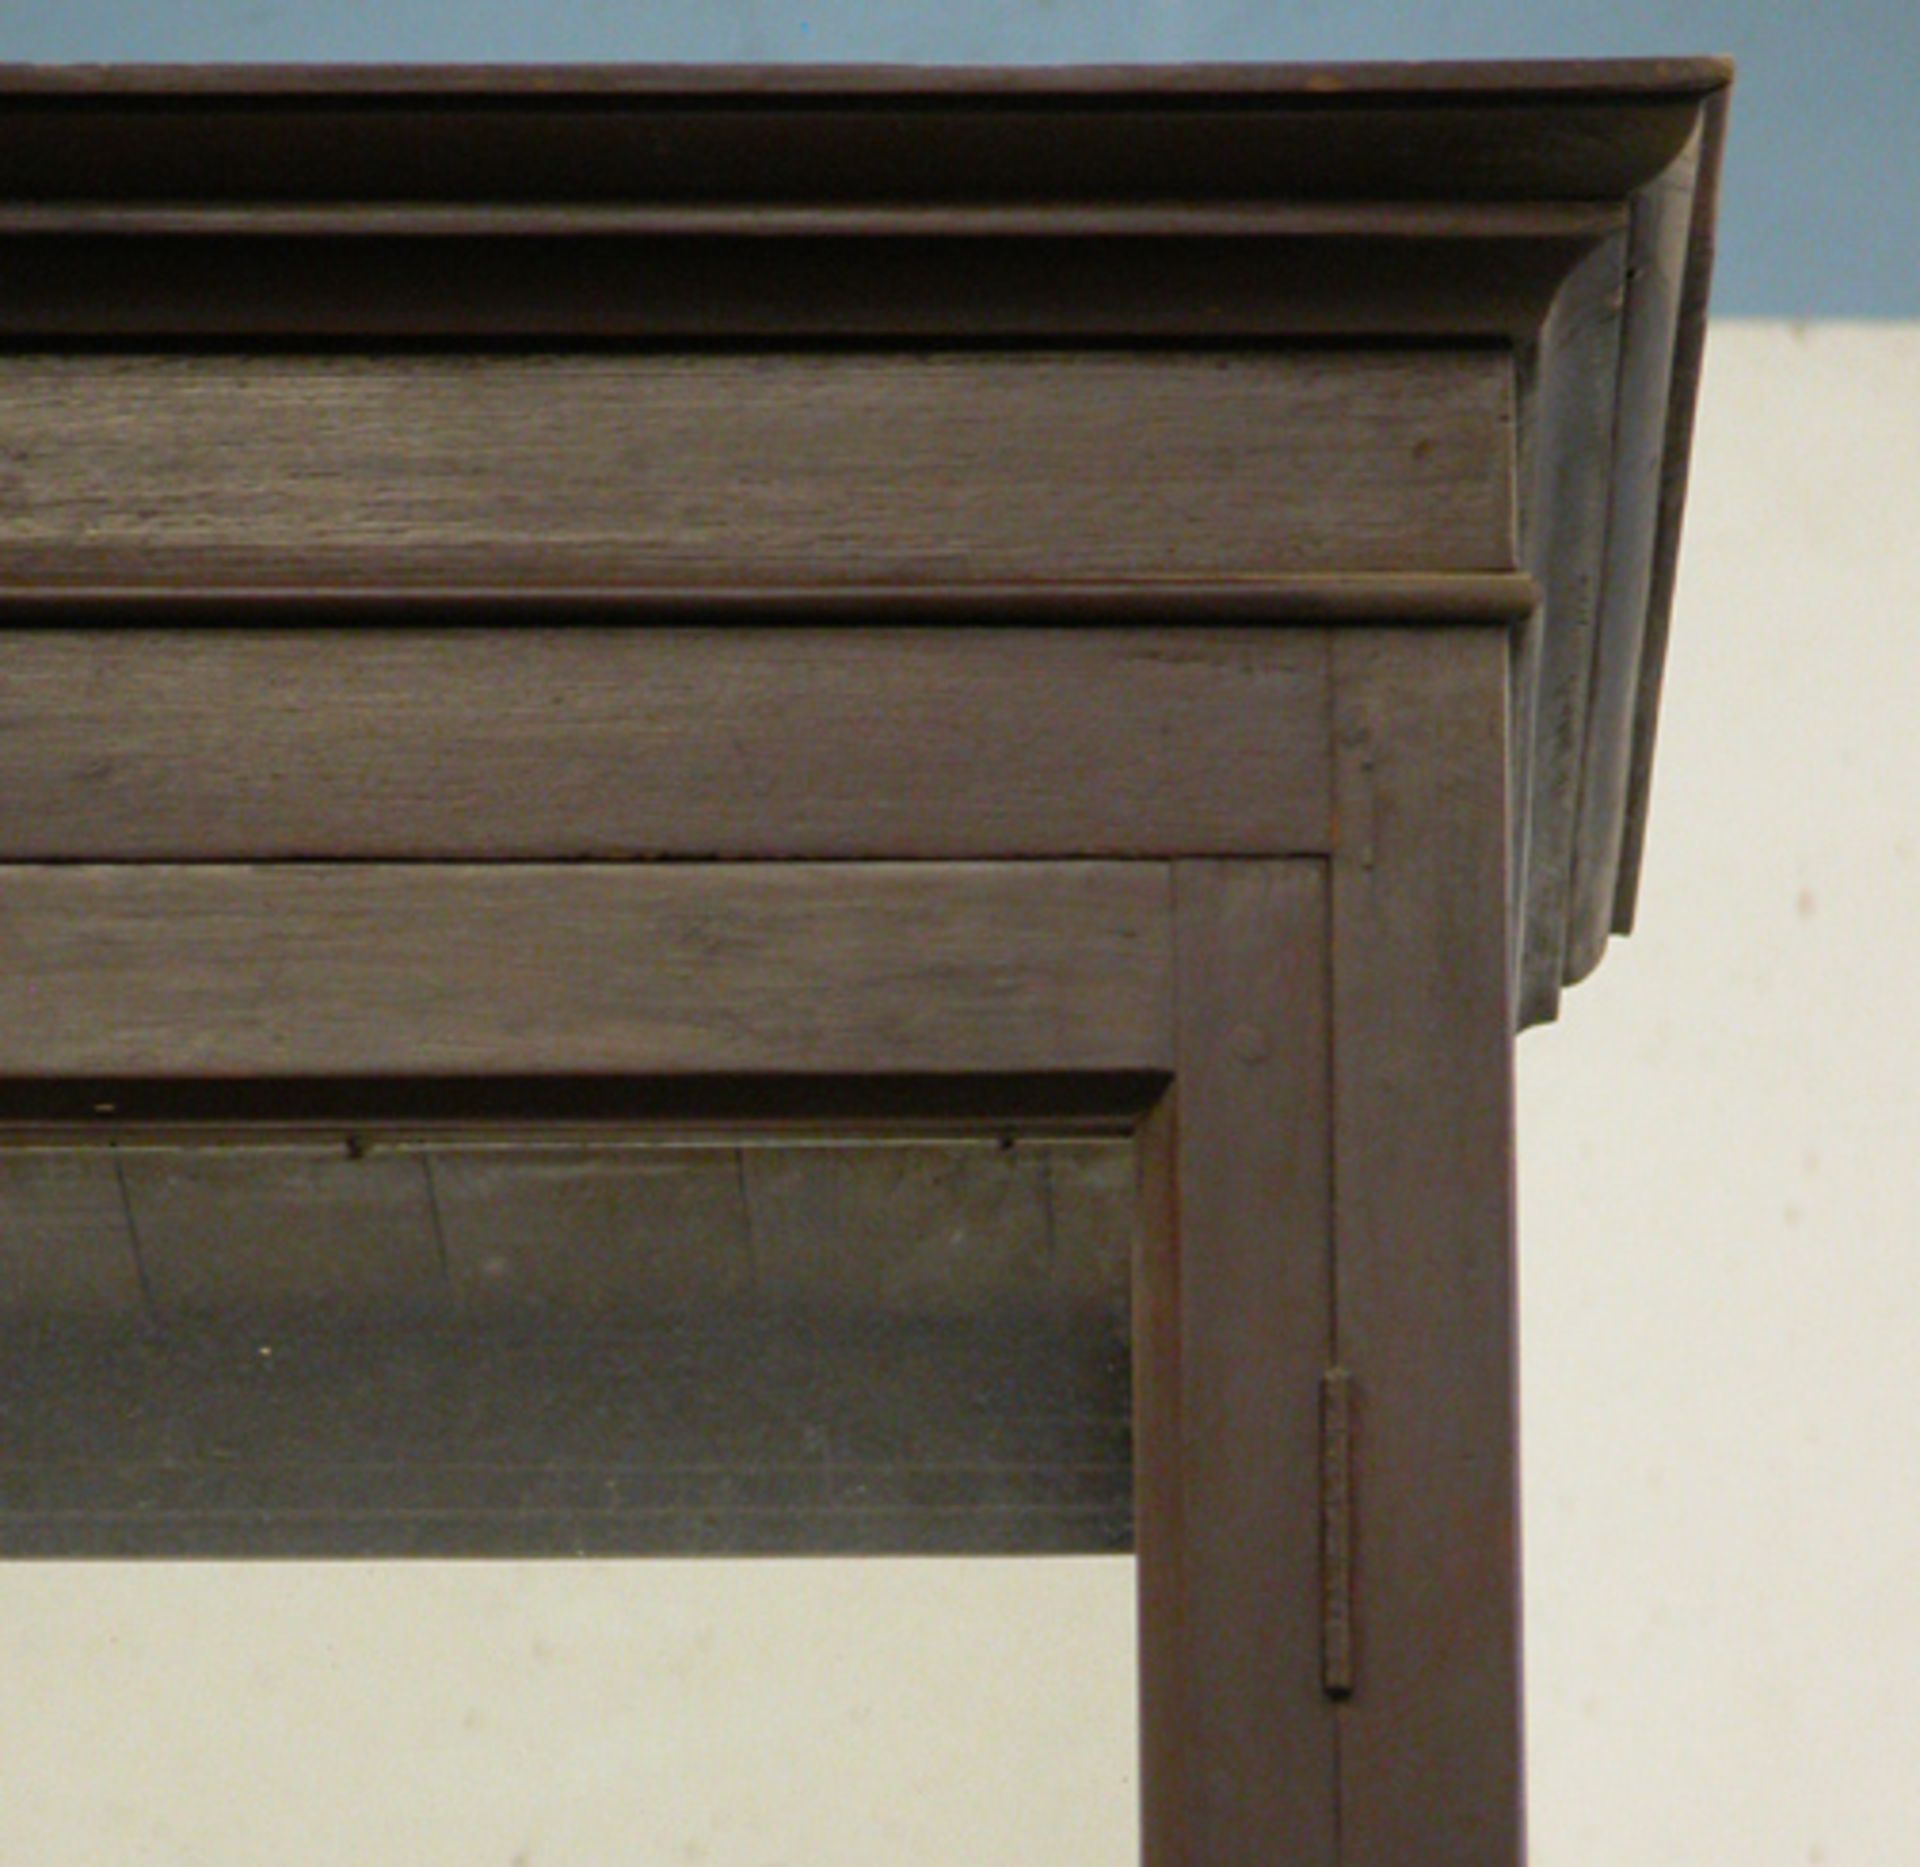 ANTIQUE TEAK SHOWCASE, LATE VICTORIAN. HEIGHT 2285MM (90IN) X WIDTH 545MM (21.25IN) X CORNICE DEPTH - Image 5 of 6